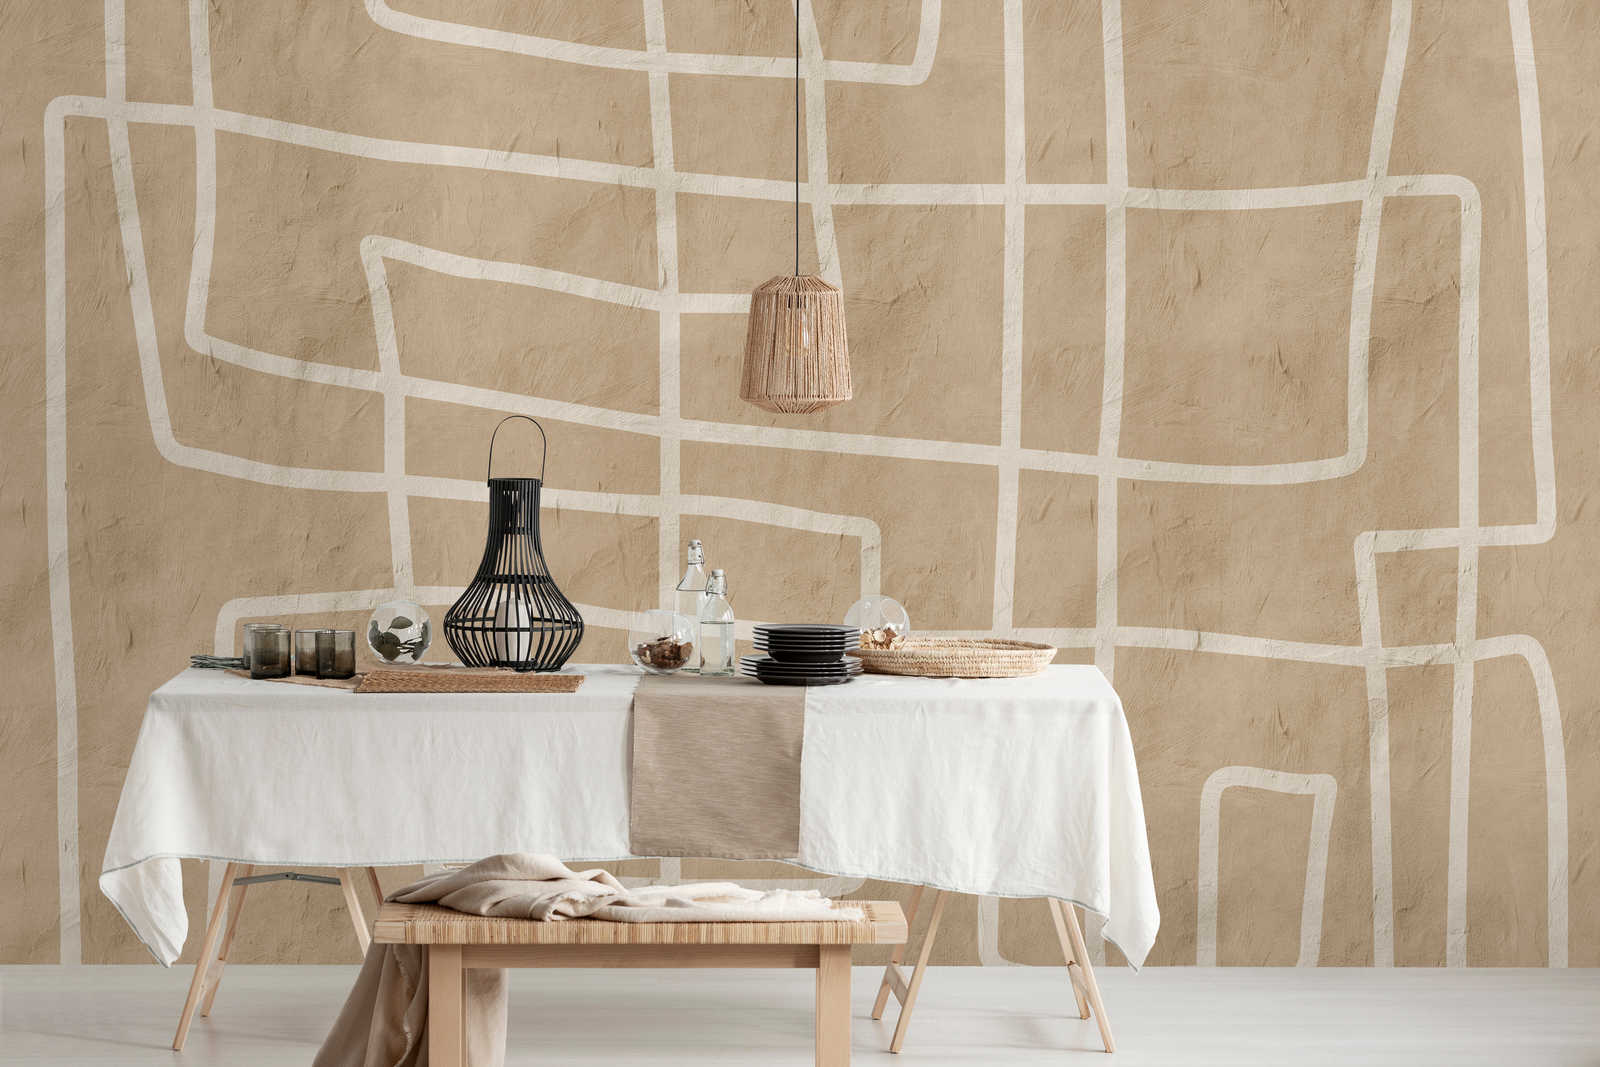             Serengeti 1 - clay wall mural with ethno line pattern in beige
        